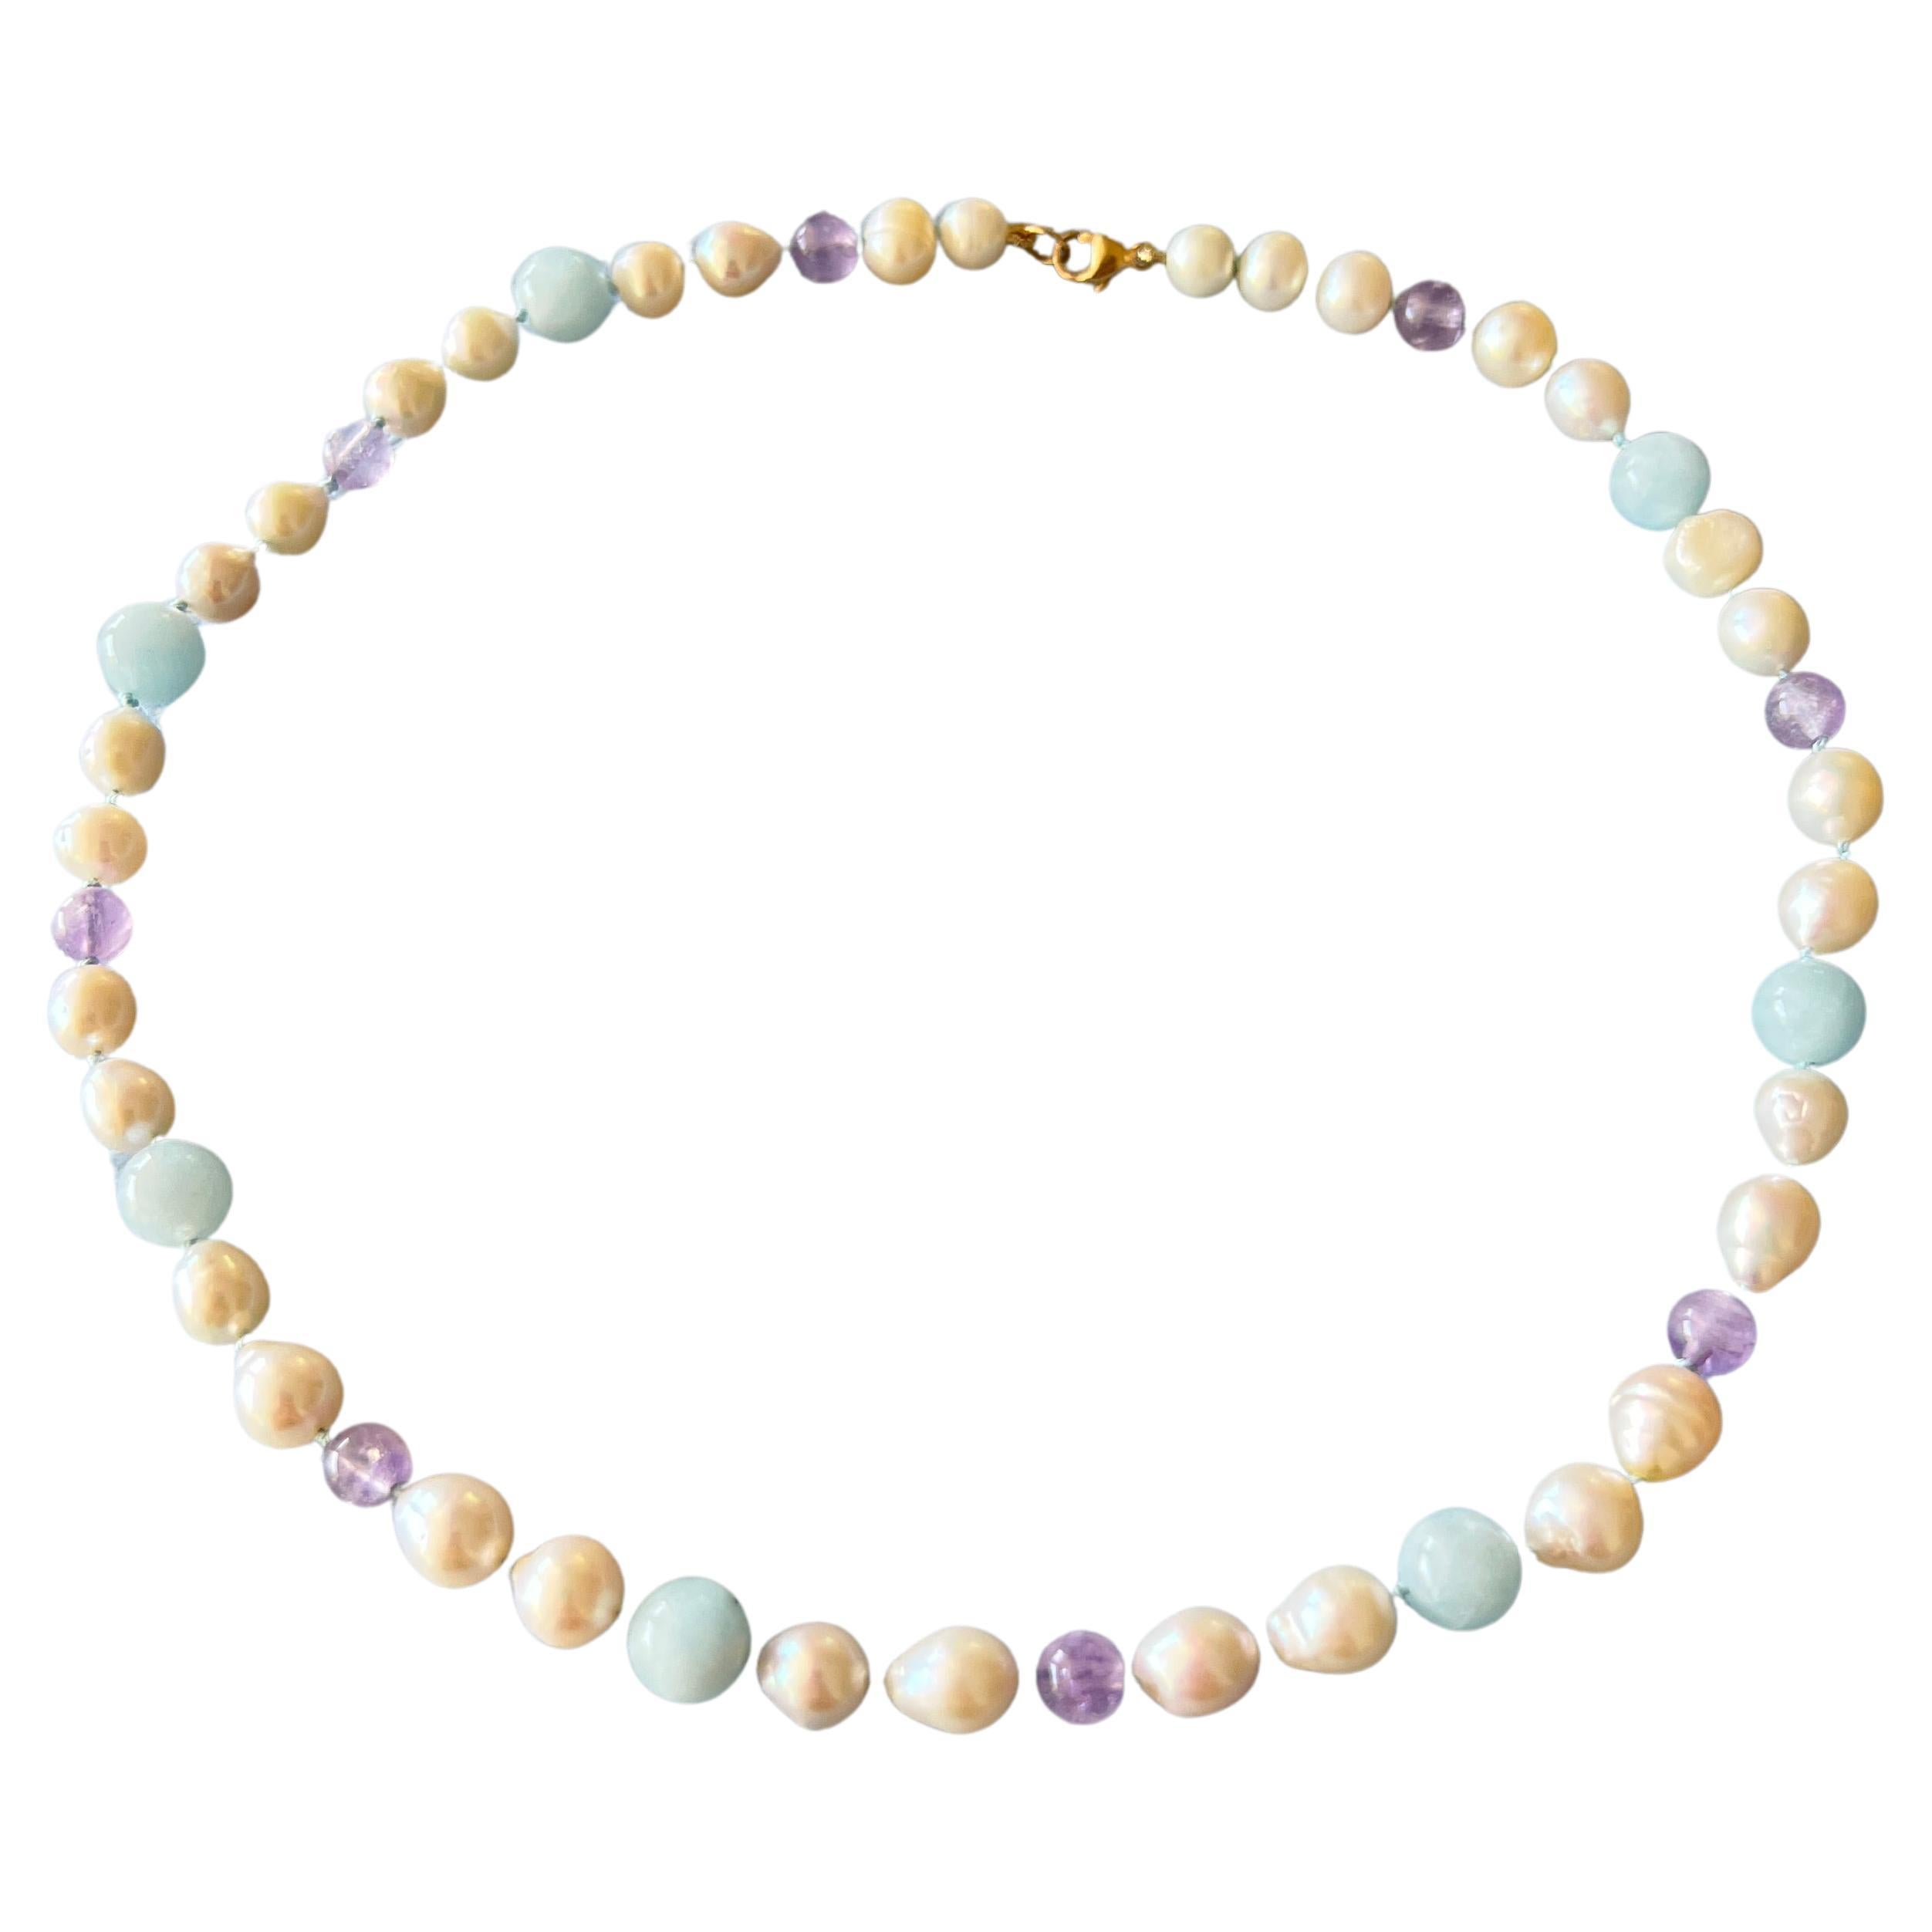 Romantic Aquamarine Amethyst Pearl Choker Bead Necklace Gold Filled J Dauphin For Sale